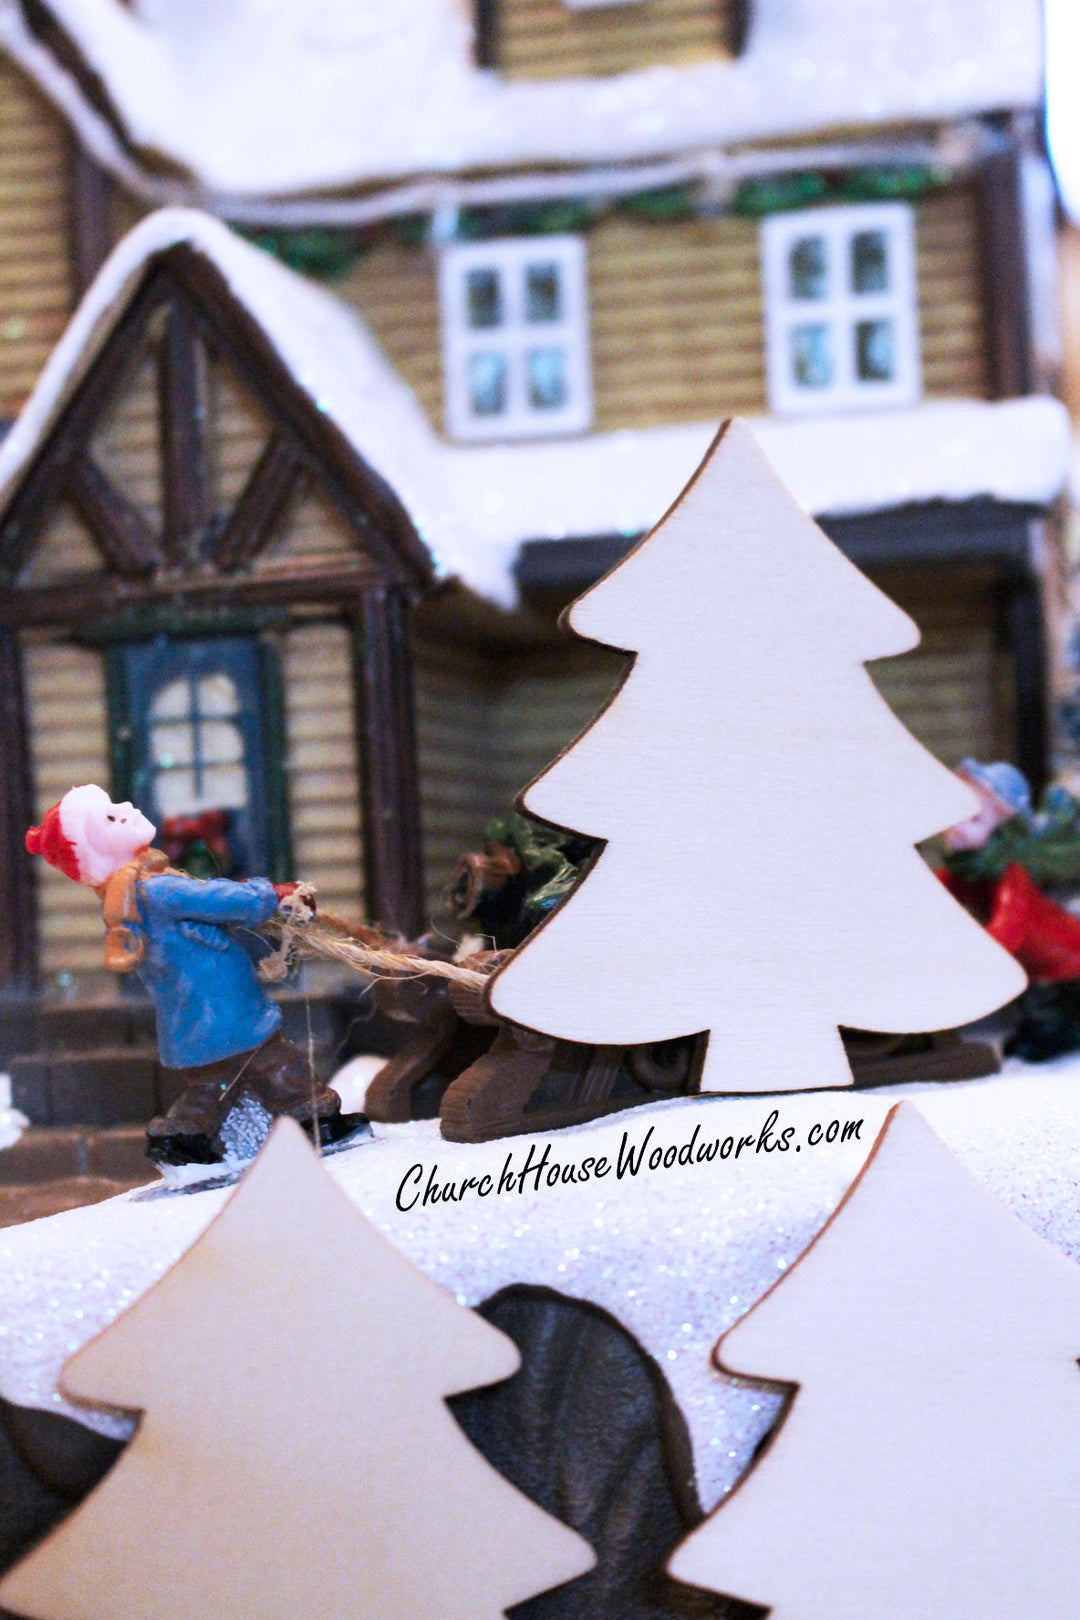 Wooden Christmas Ornaments-Christmas Tree Ornaments by ChurchHouseWoodworks.com